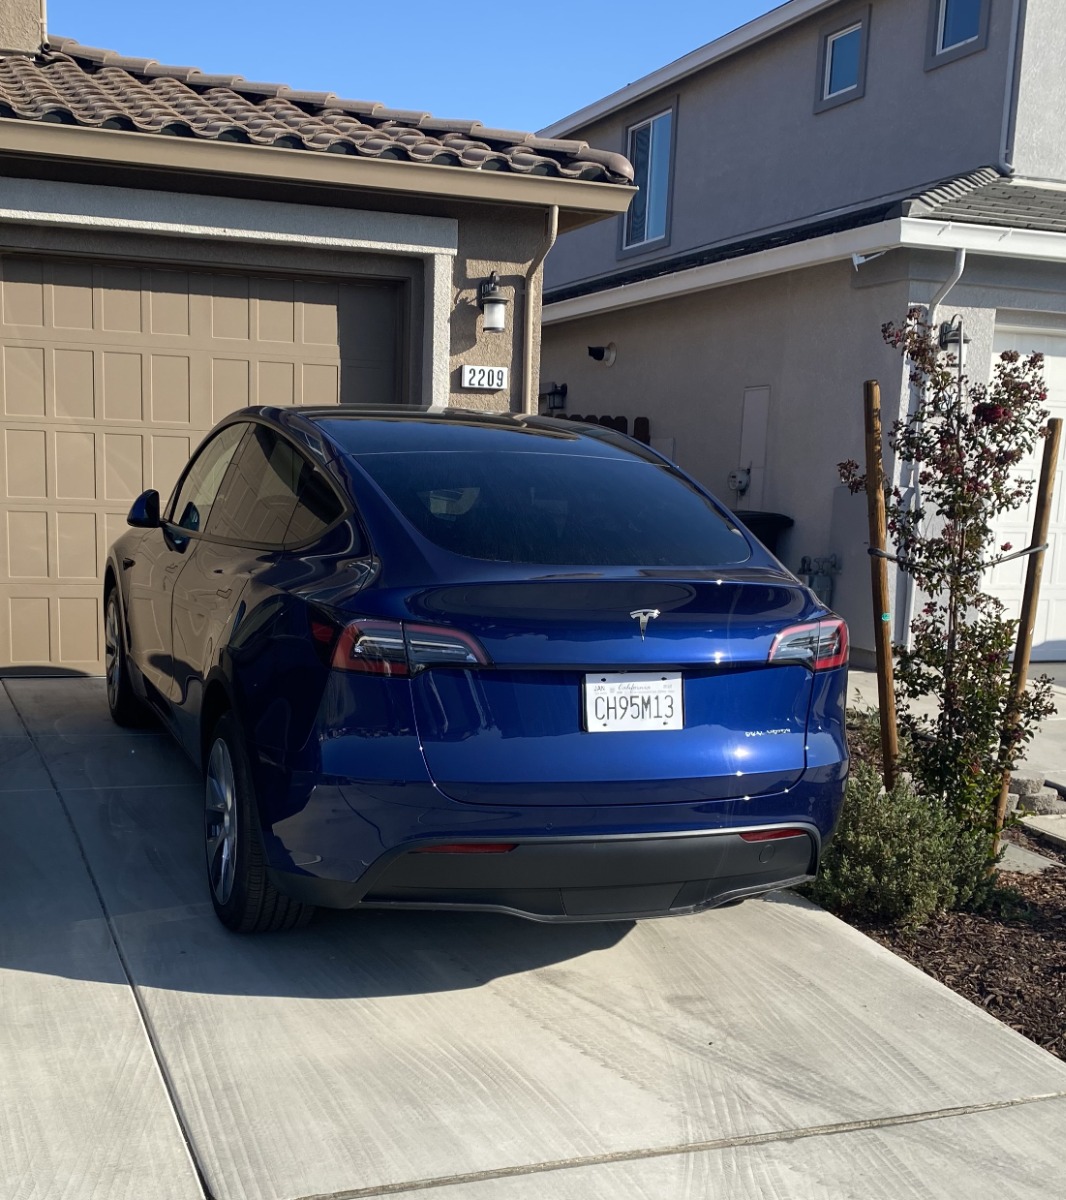 German-Made Tesla Model Y RWD Now Available In Midnight Cherry Red,  Quicksilver